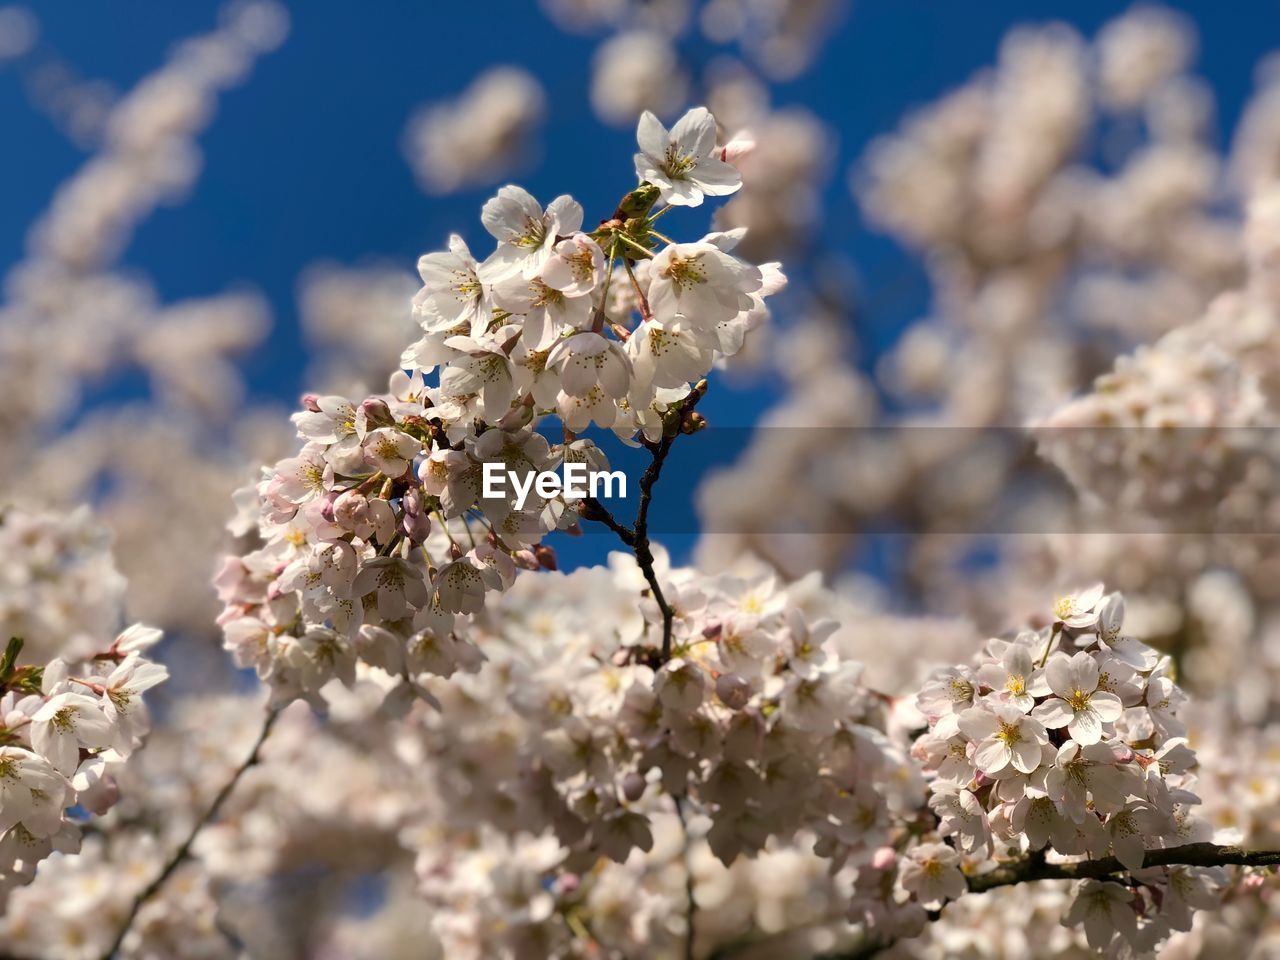 CLOSE-UP OF CHERRY BLOSSOMS ON BRANCH